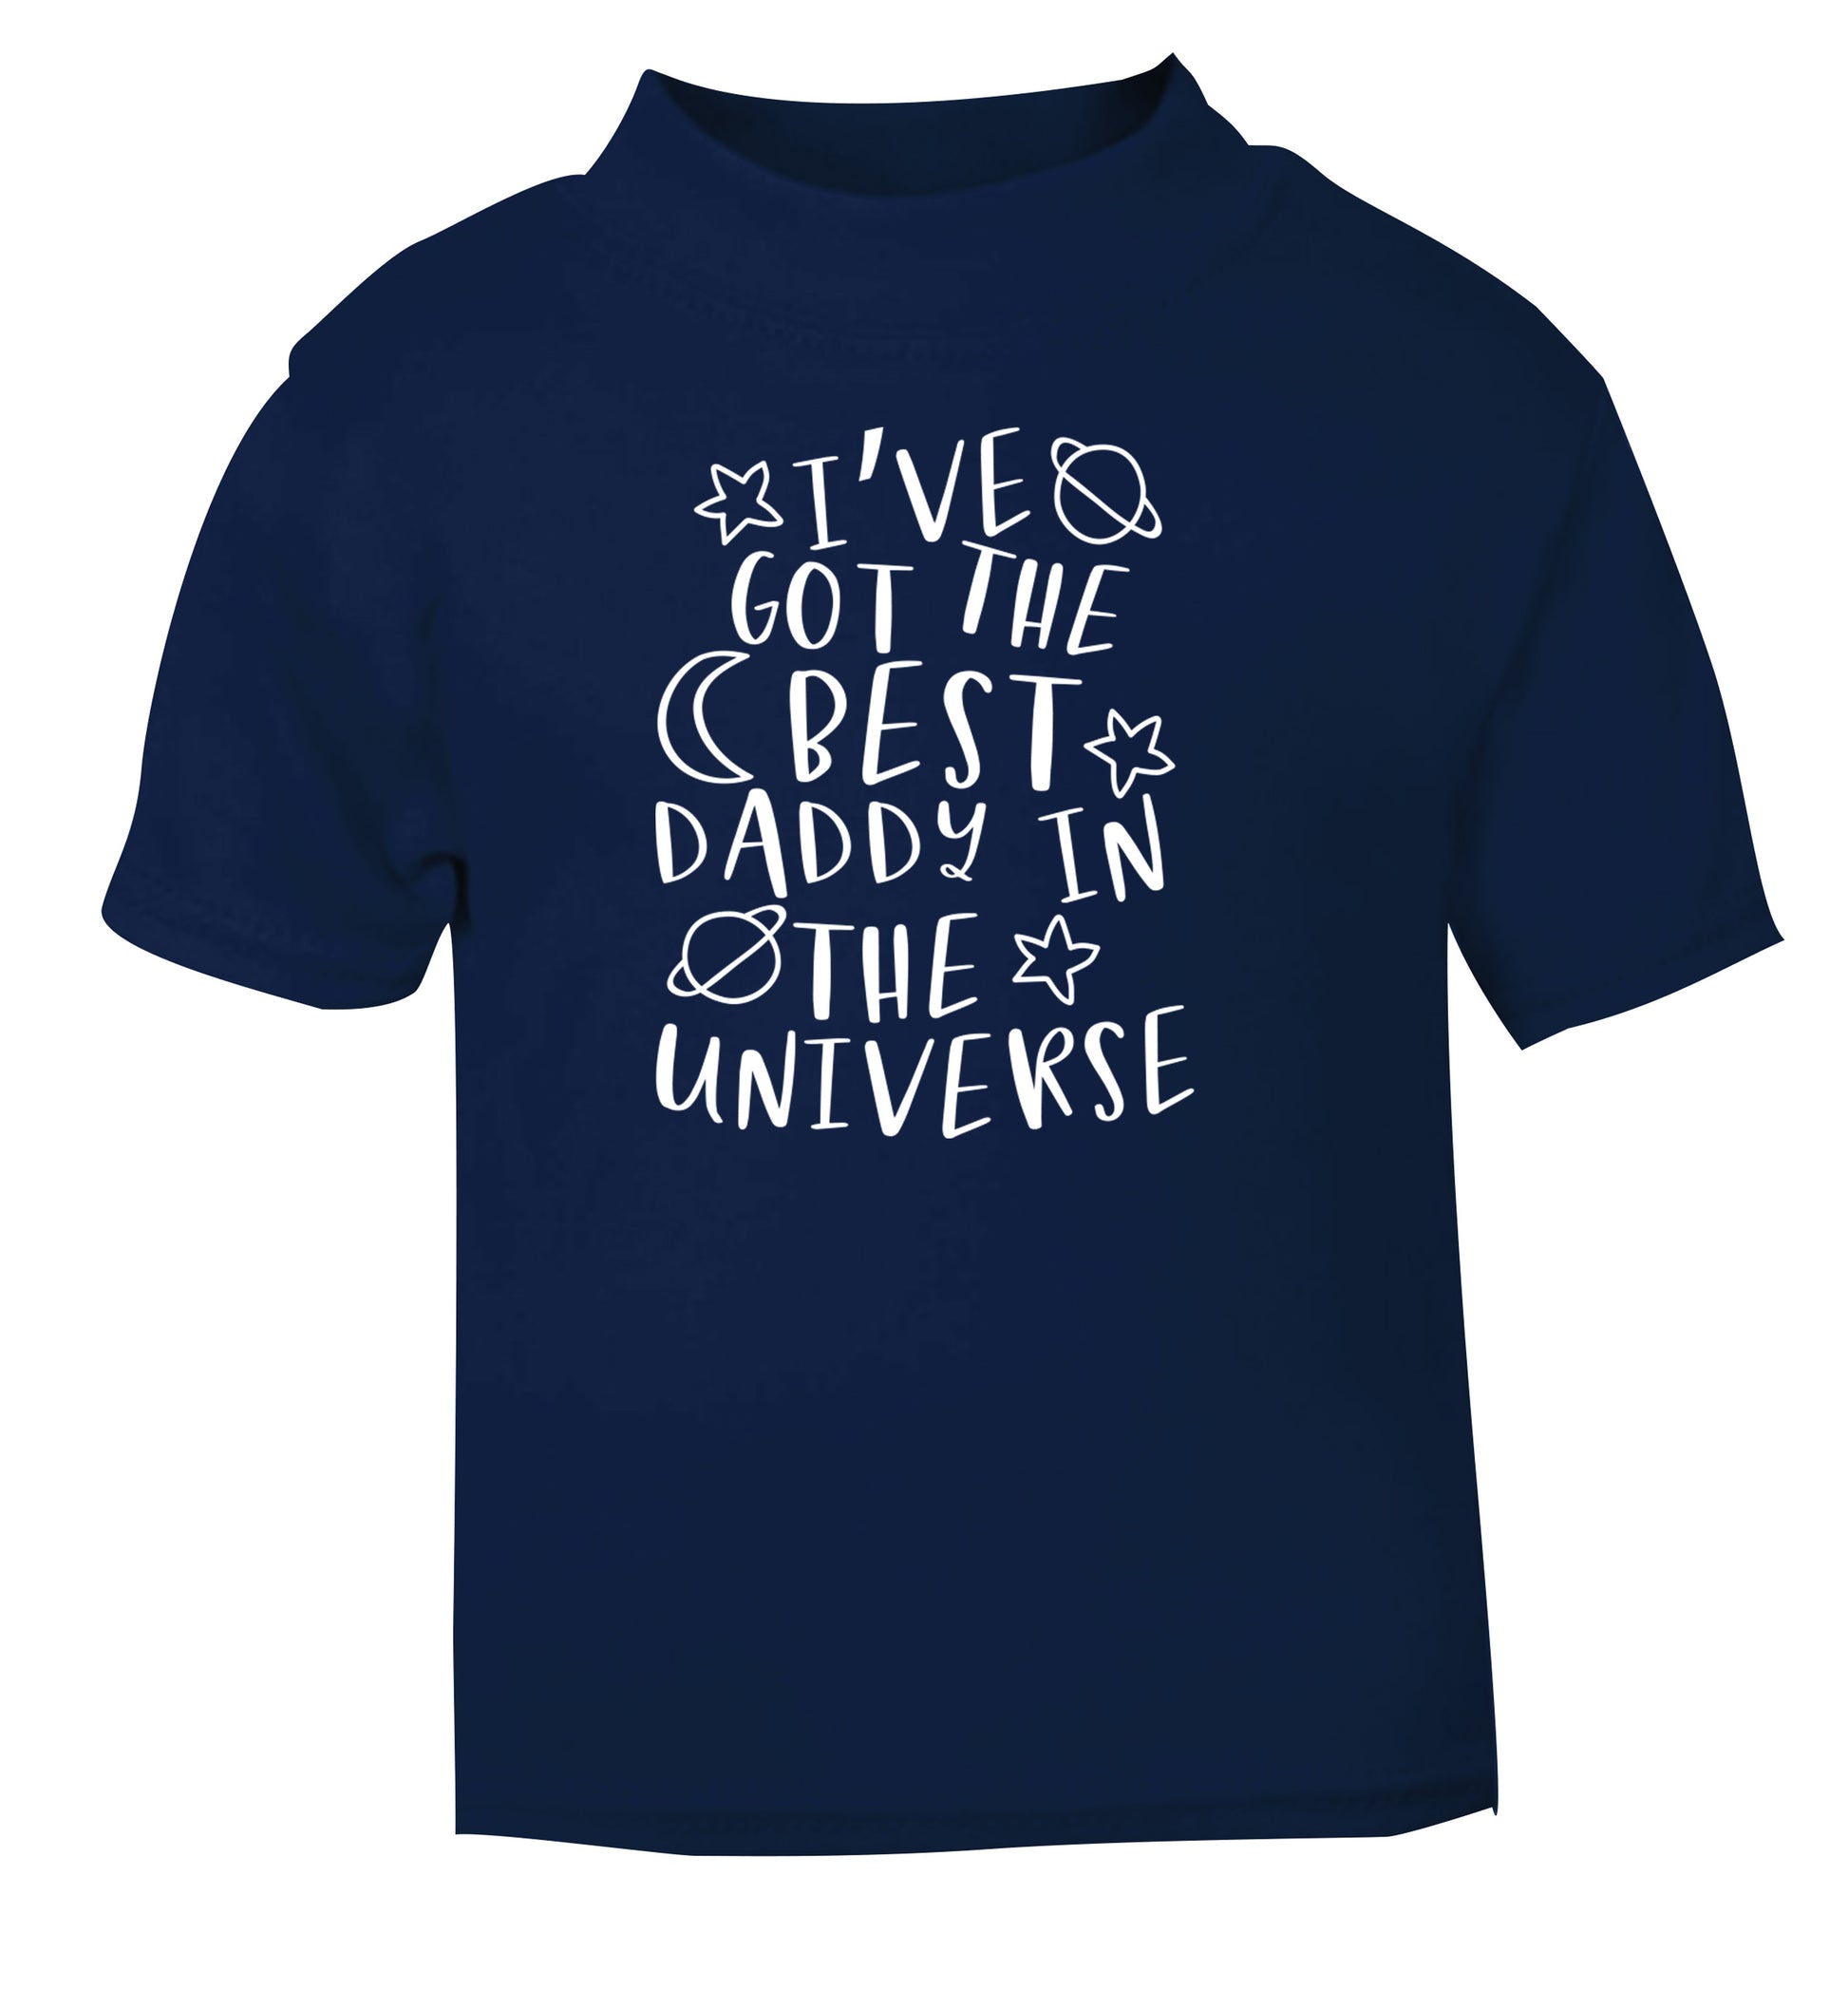 I've got the best daddy in the universe navy Baby Toddler Tshirt 2 Years